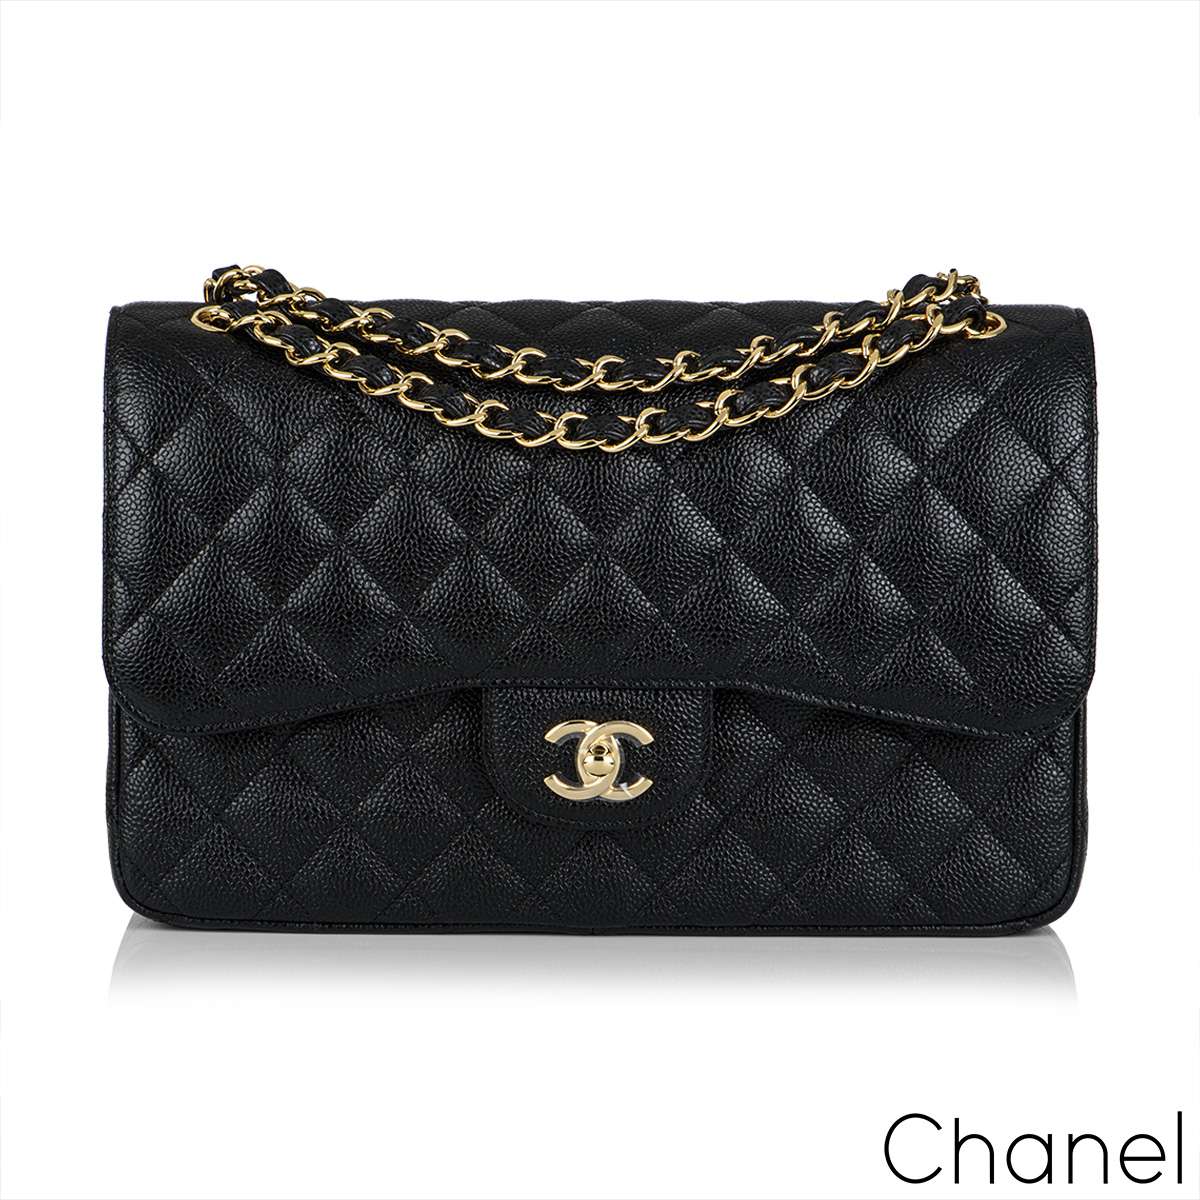 Chanel Classic Large Timeless Double Flap Bag Beige Caviar